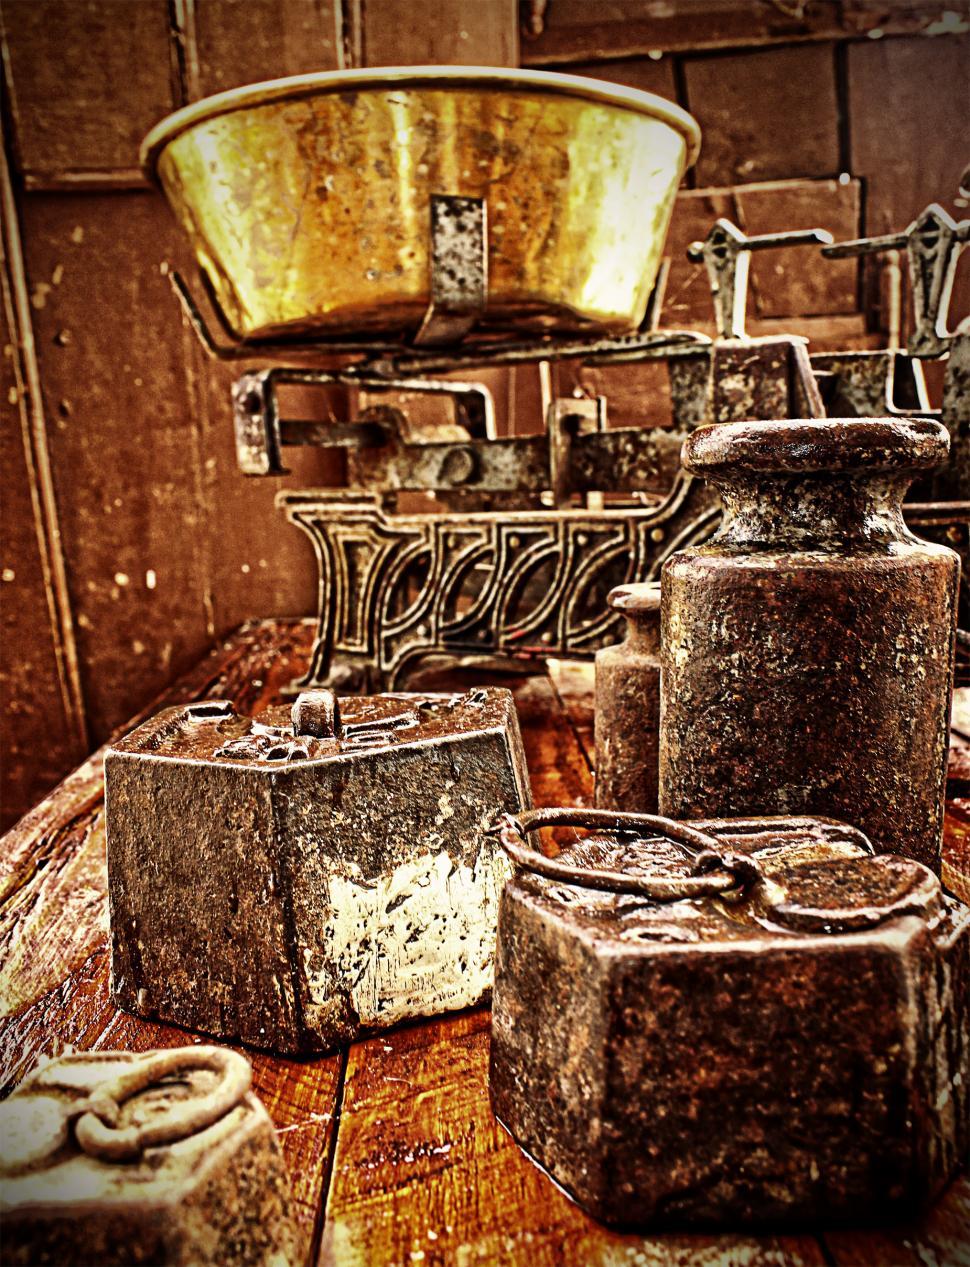 Free Image of Old rusty scales and weights - Grunge looks 